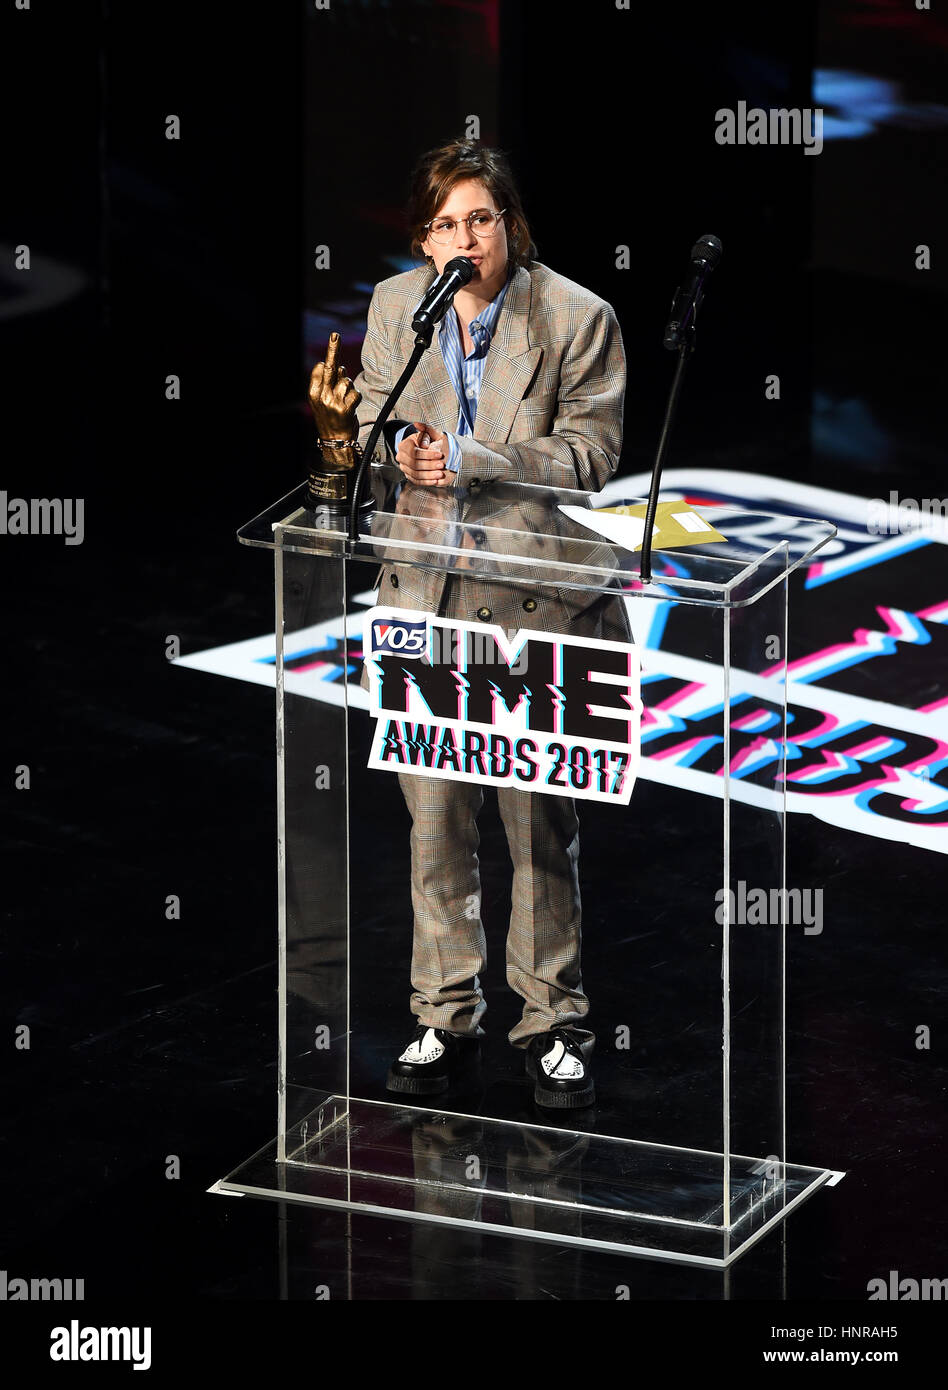 Christine and the Queens collects her award for Best International Female Artist during the VO5 NME Awards 2017 held at the O2 Brixton Academy, London. Stock Photo